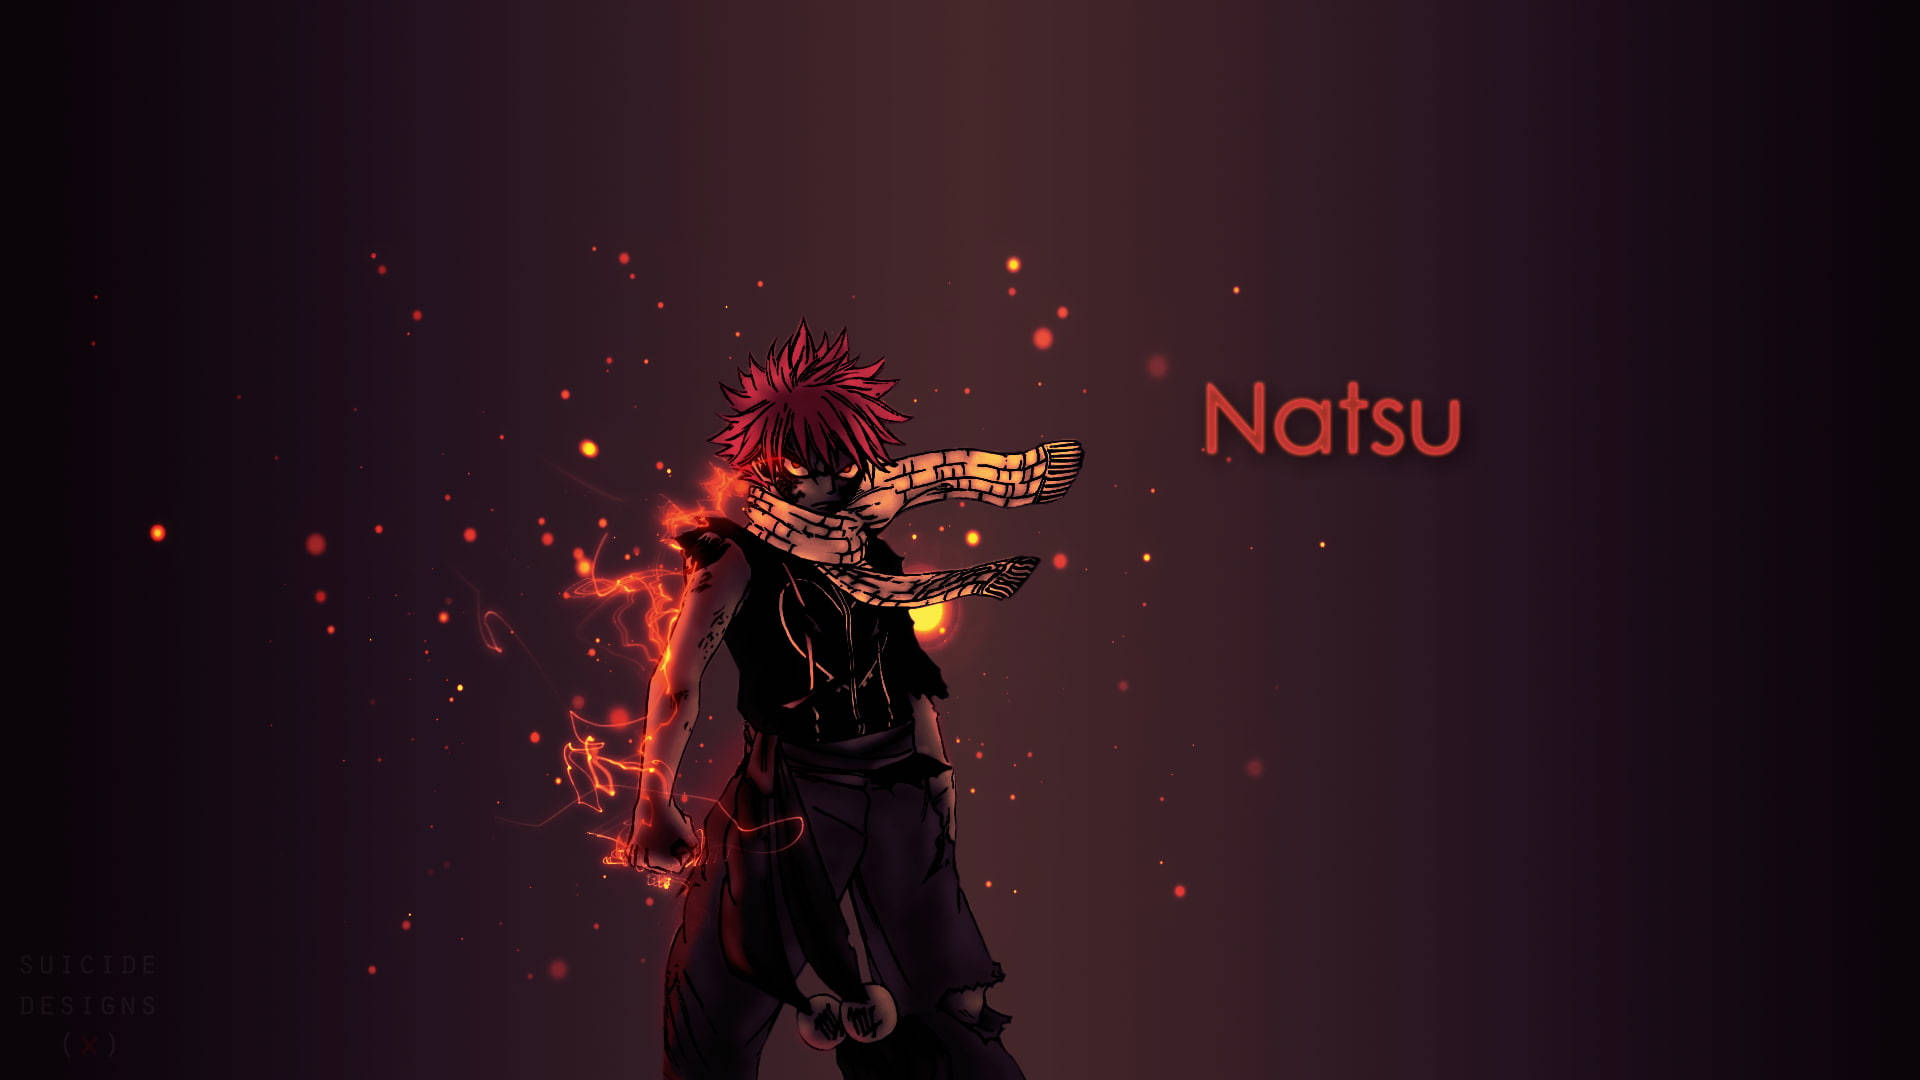 Fairy Tail Character Natsu Dragneel Wallpaper